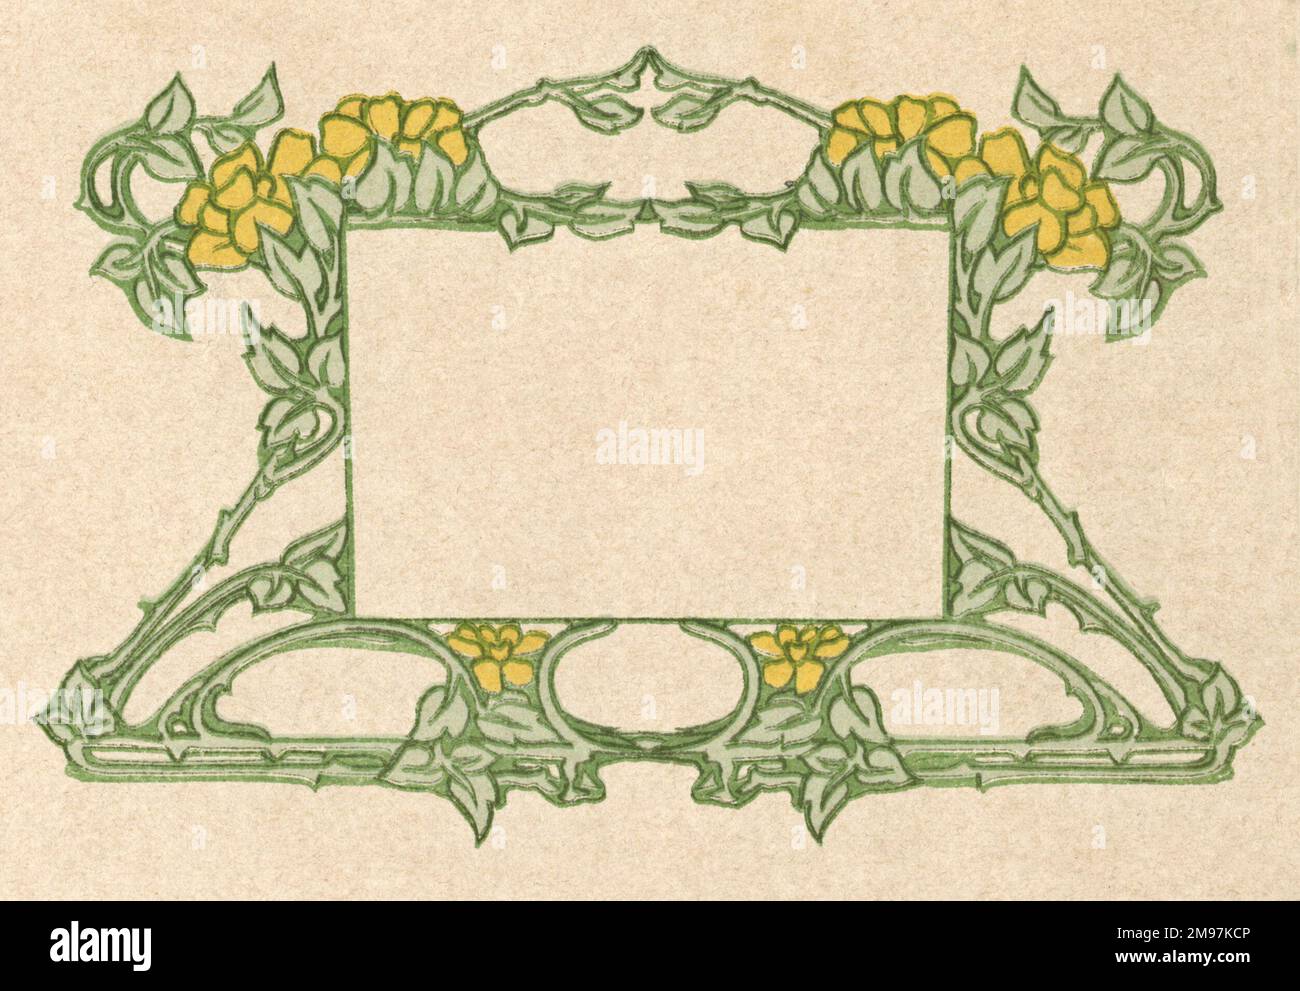 Art nouveau leaf and flower design with yellow flowers and a rectangular space at the centre. Stock Photo